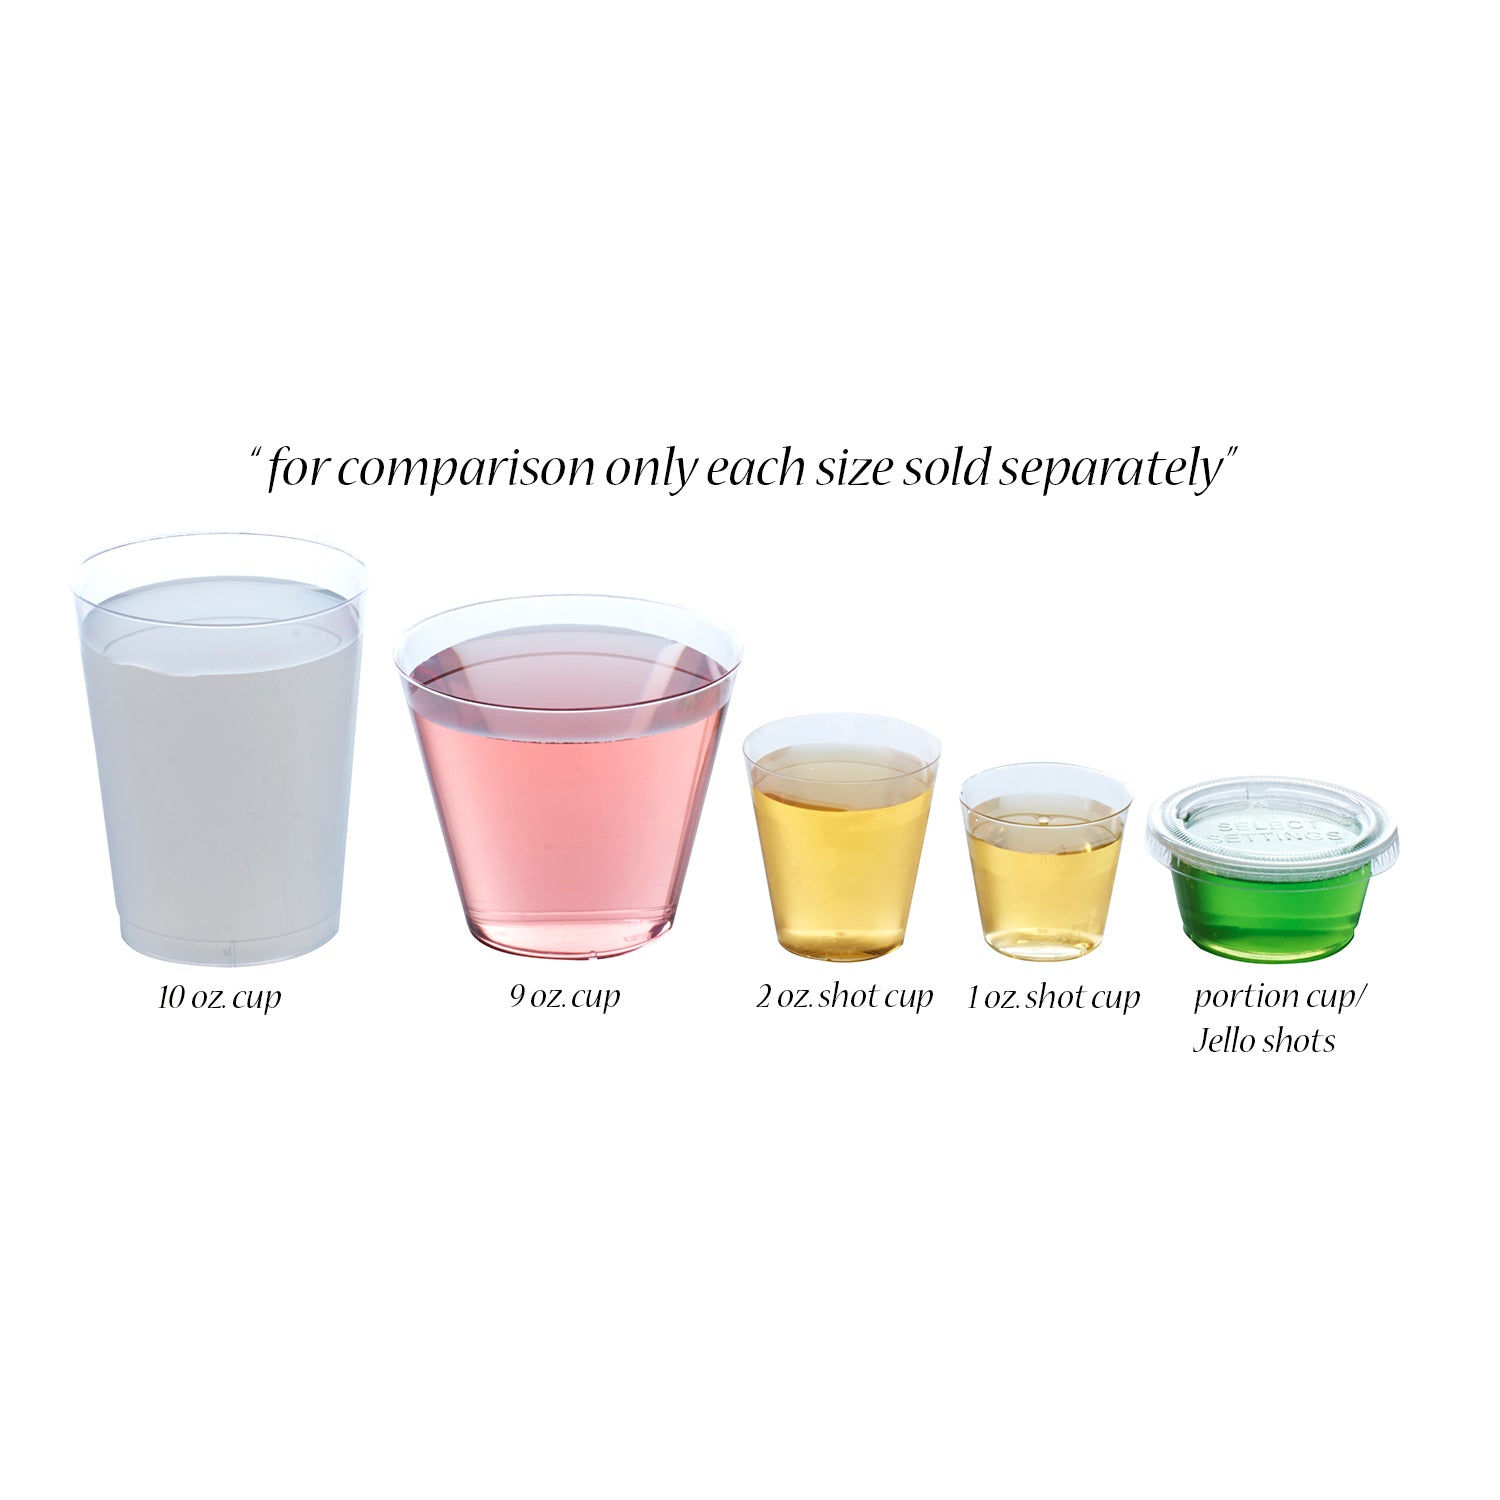 200 Sets - 2 oz. Disposable Plastic Portion Cups with Lids, Small